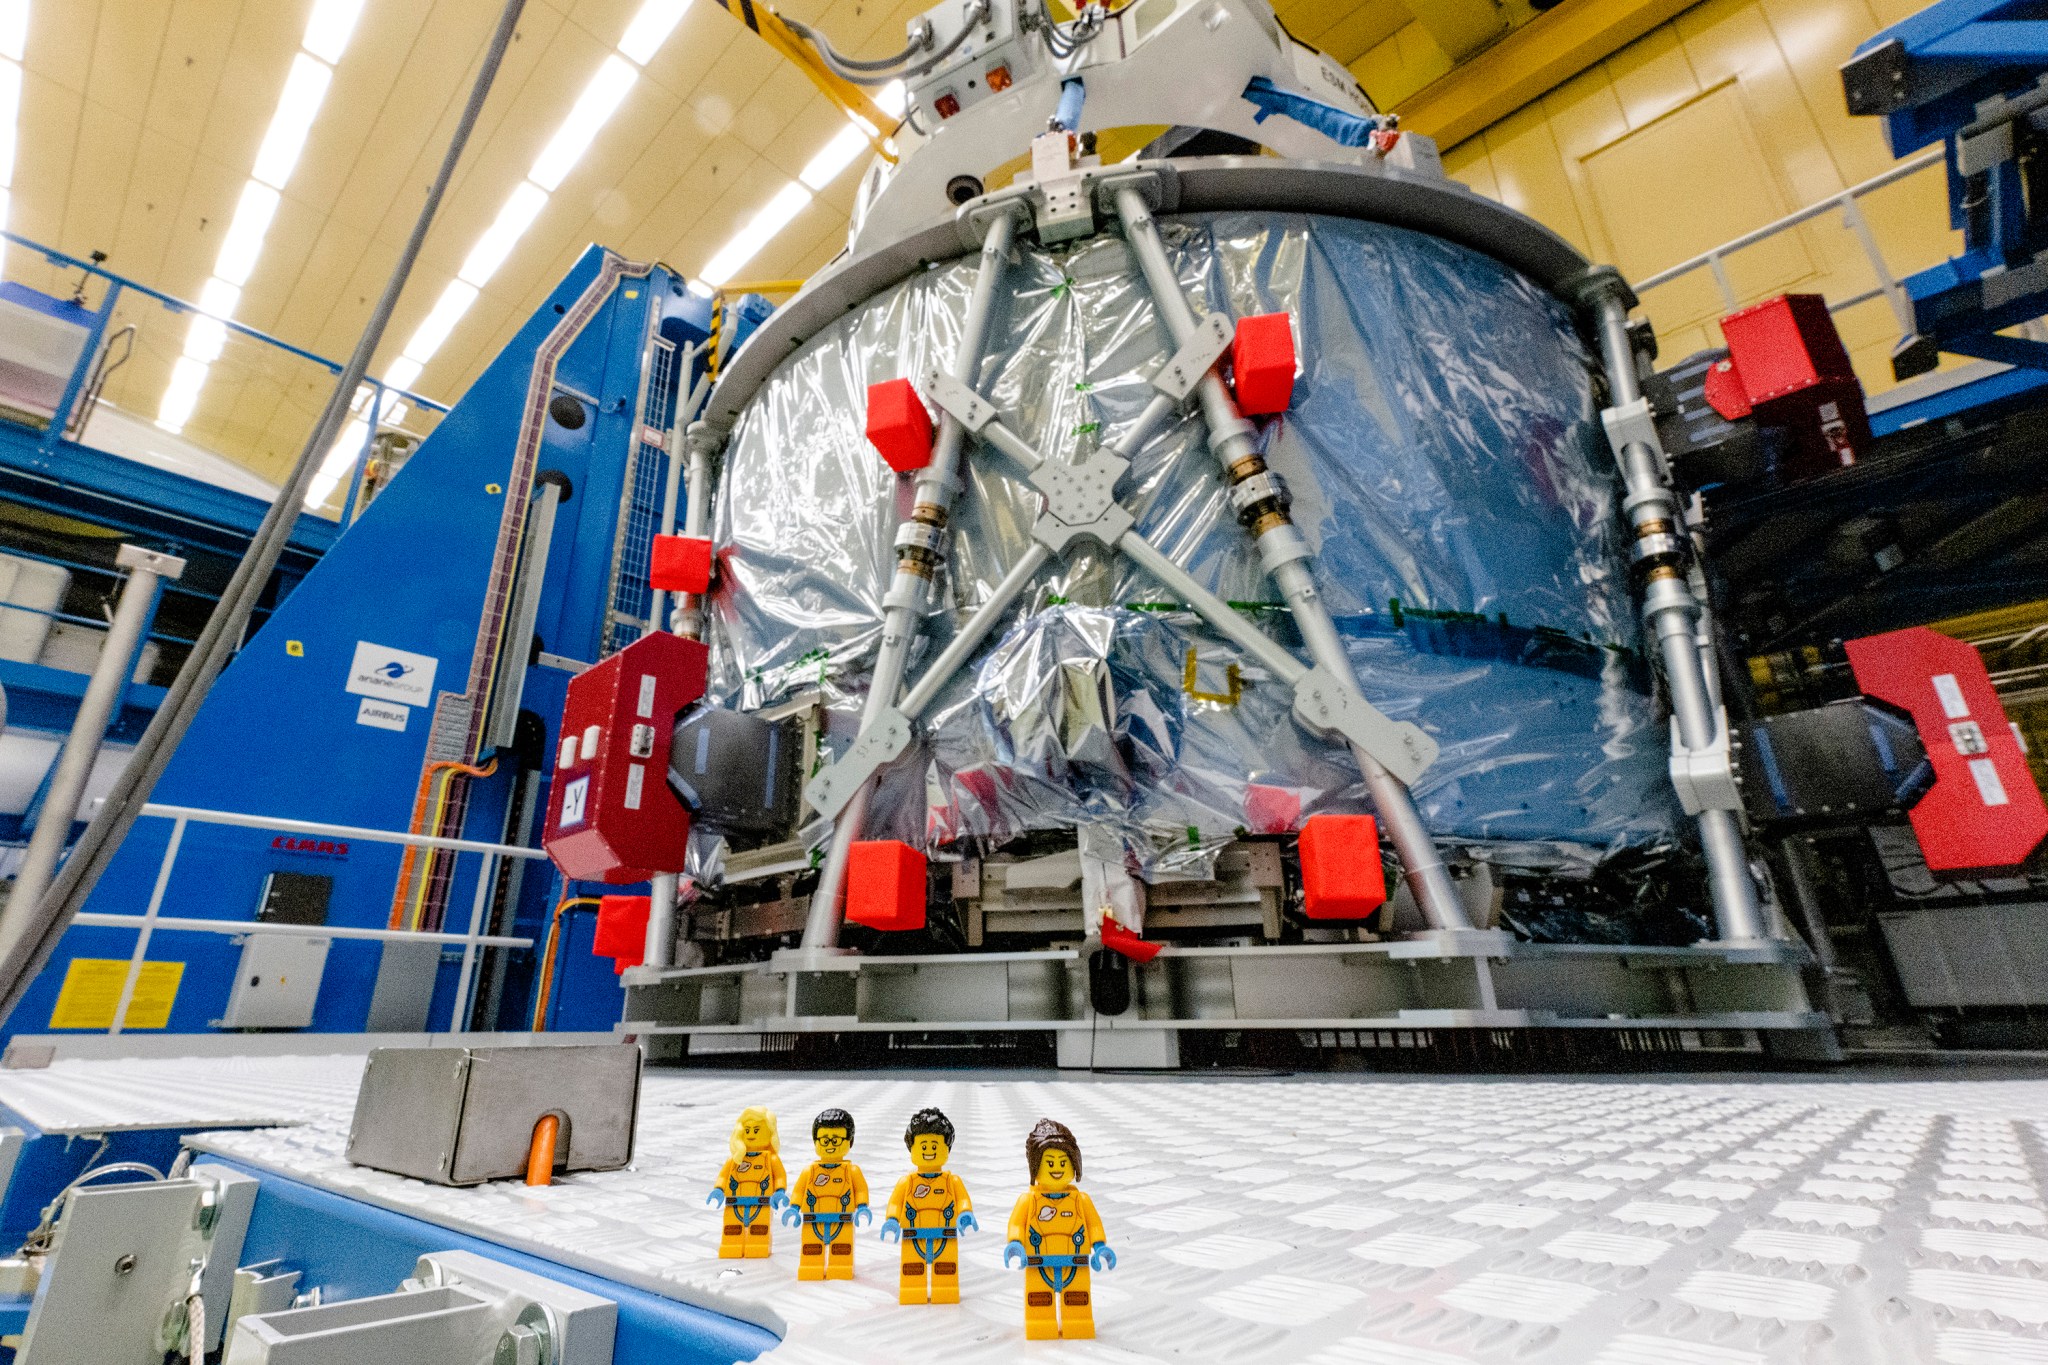 Representative LEGO minifigures in front of European Service Module that will power the Orion spacecraft on Artemis II. Four LEGO minifigures will fly on Artemis I as part of the official flight kit.